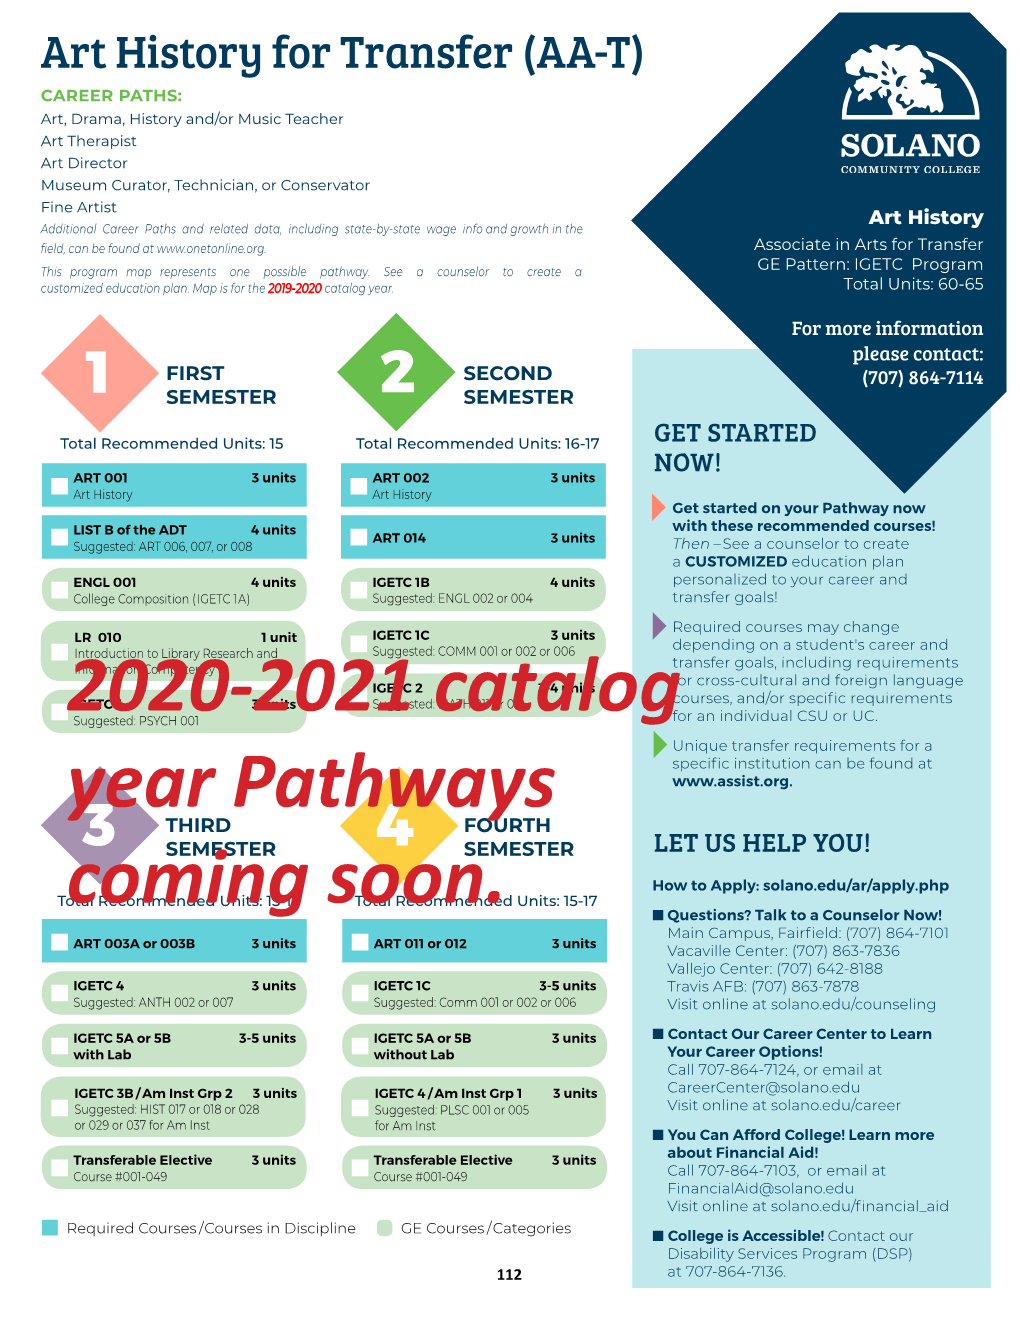 2020-2021 Catalog Year Pathways Coming Soon